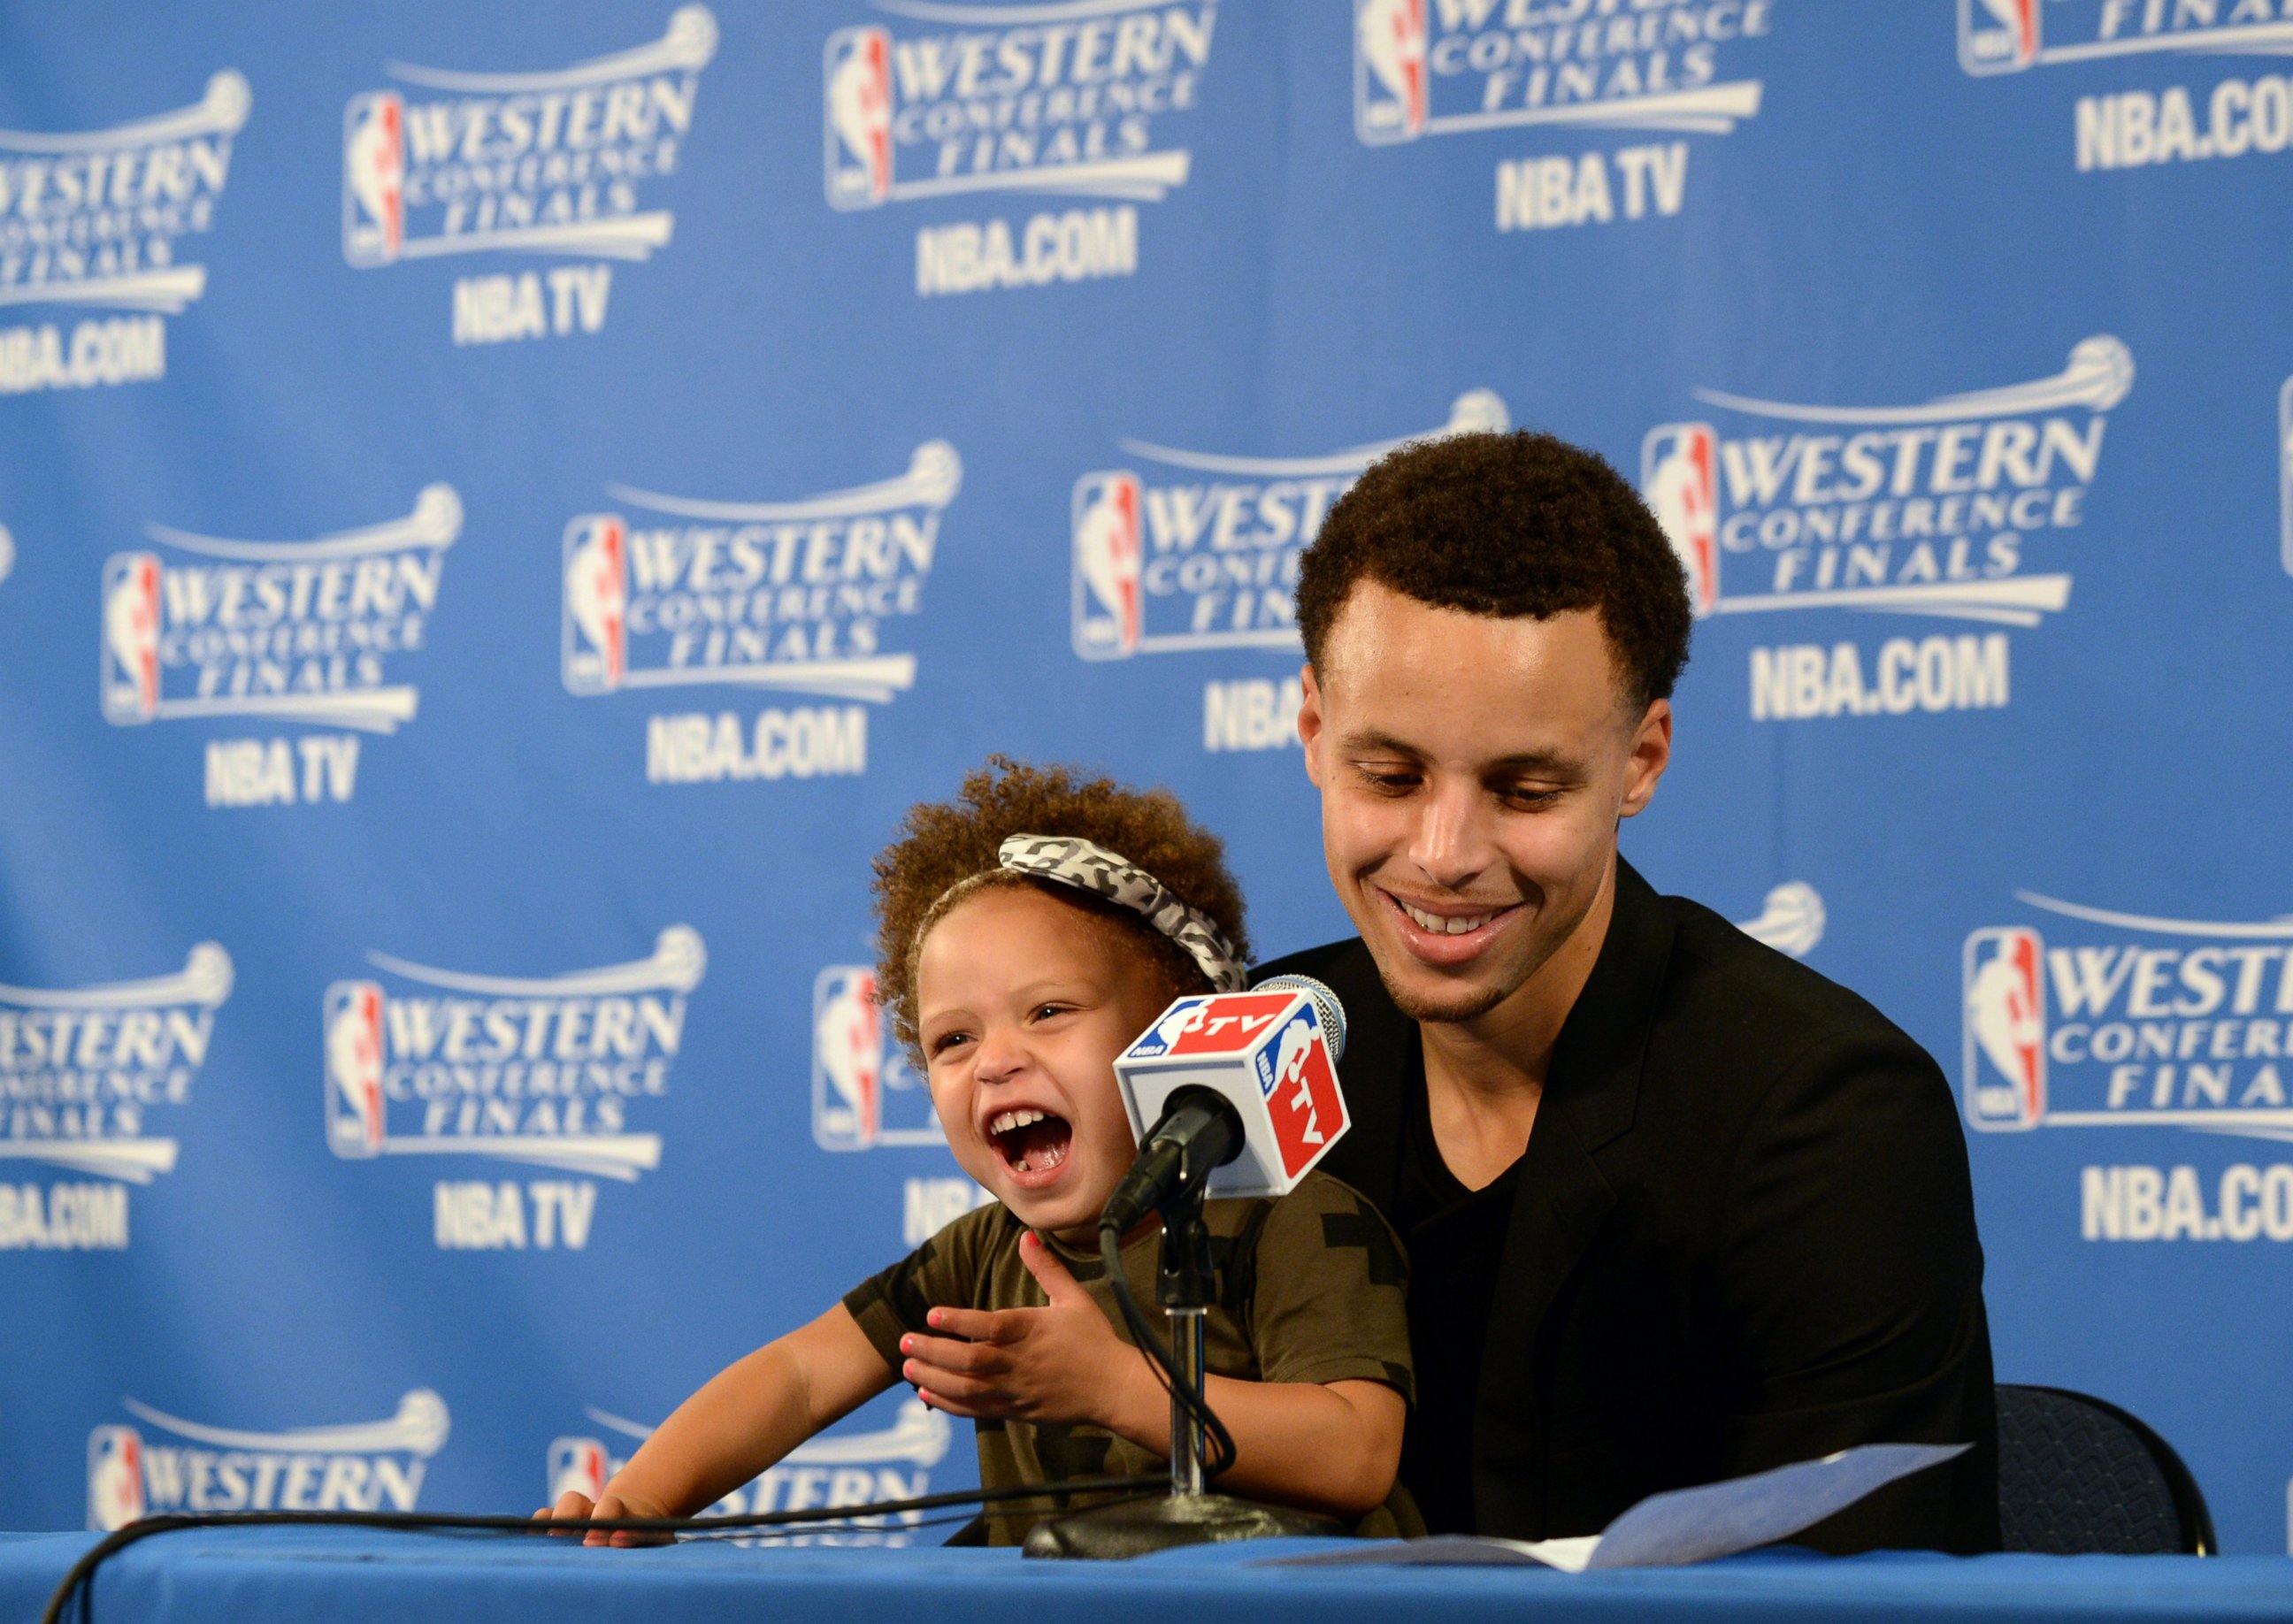 PHOTO: Stephen Curry of the Golden State Warriors and his daughter Riley speak at a press conference after Game One of the Western Conference Finals during the NBA Playoffs at Oracle Arena in Oakland, Calif., May 19, 2015.